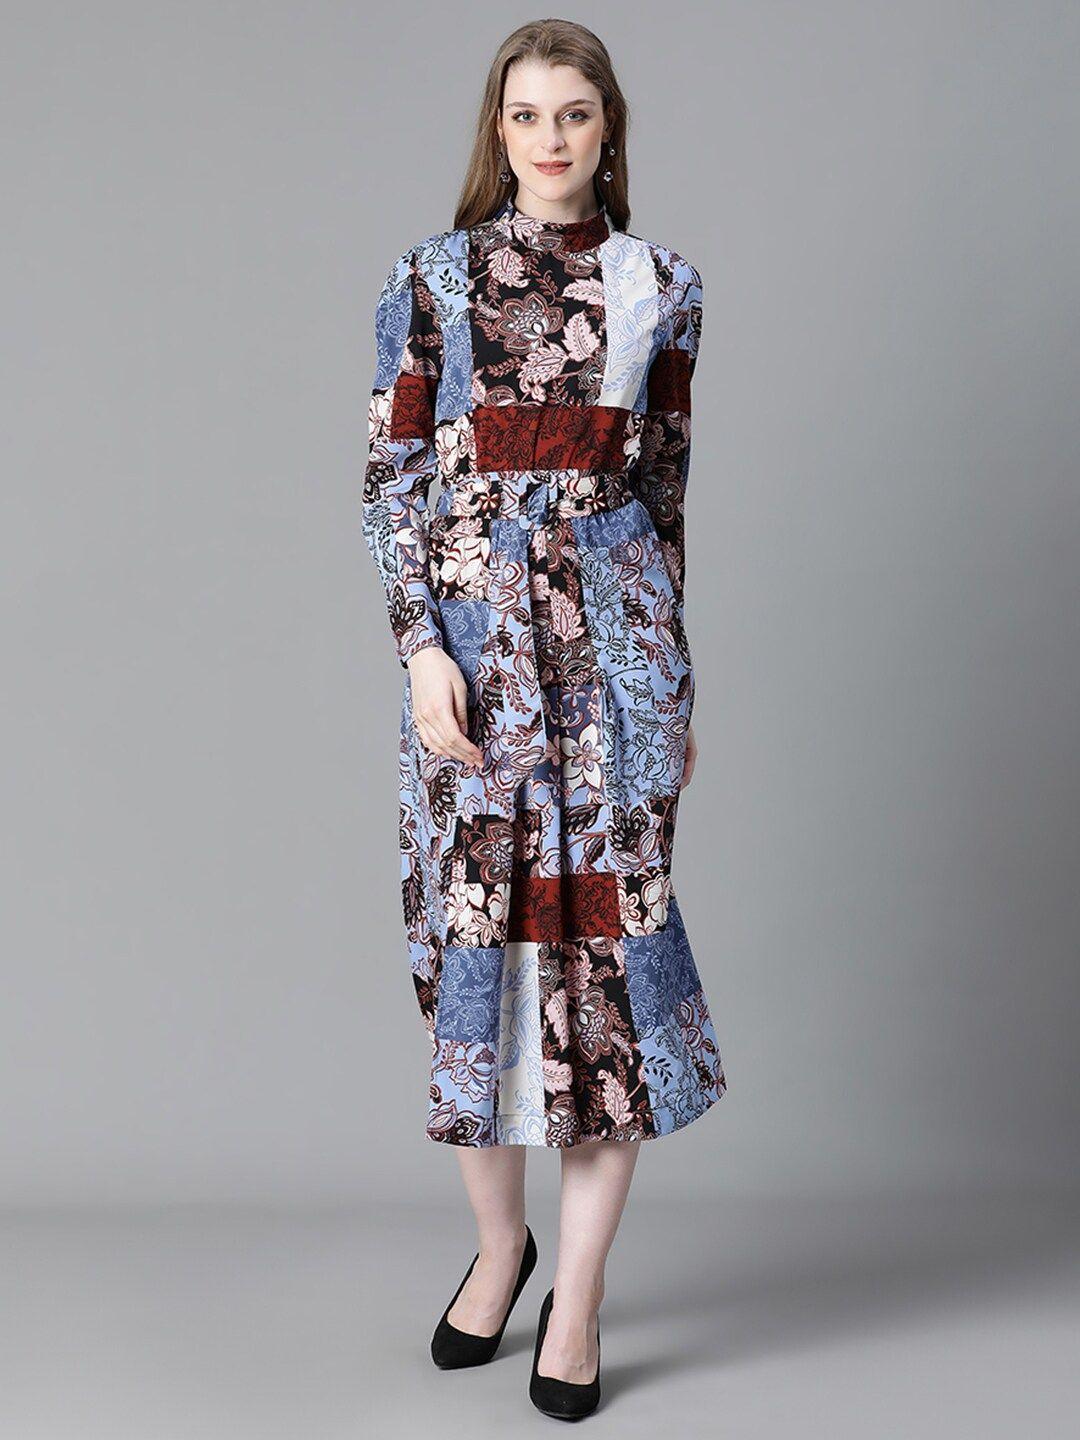 oxolloxo ethnic motifs printed high neck cuffed sleeve belted a-line dress